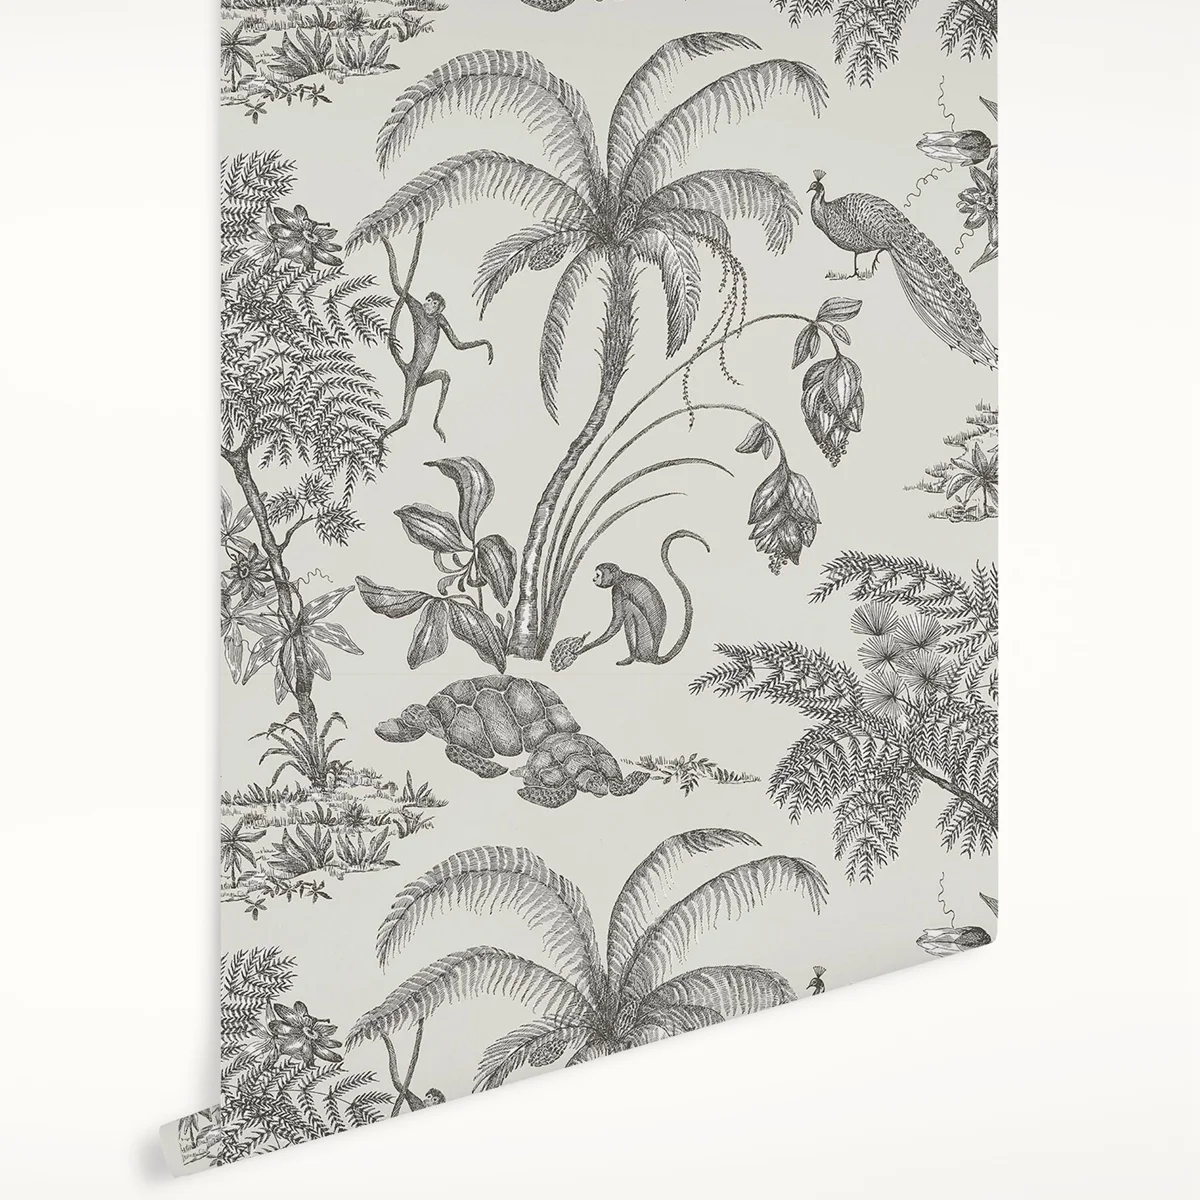 Ancient Tropical Jungle Animals Wallpaper with monkey, Peacoark and Palm Trees in Forest, Black and White Wall paper